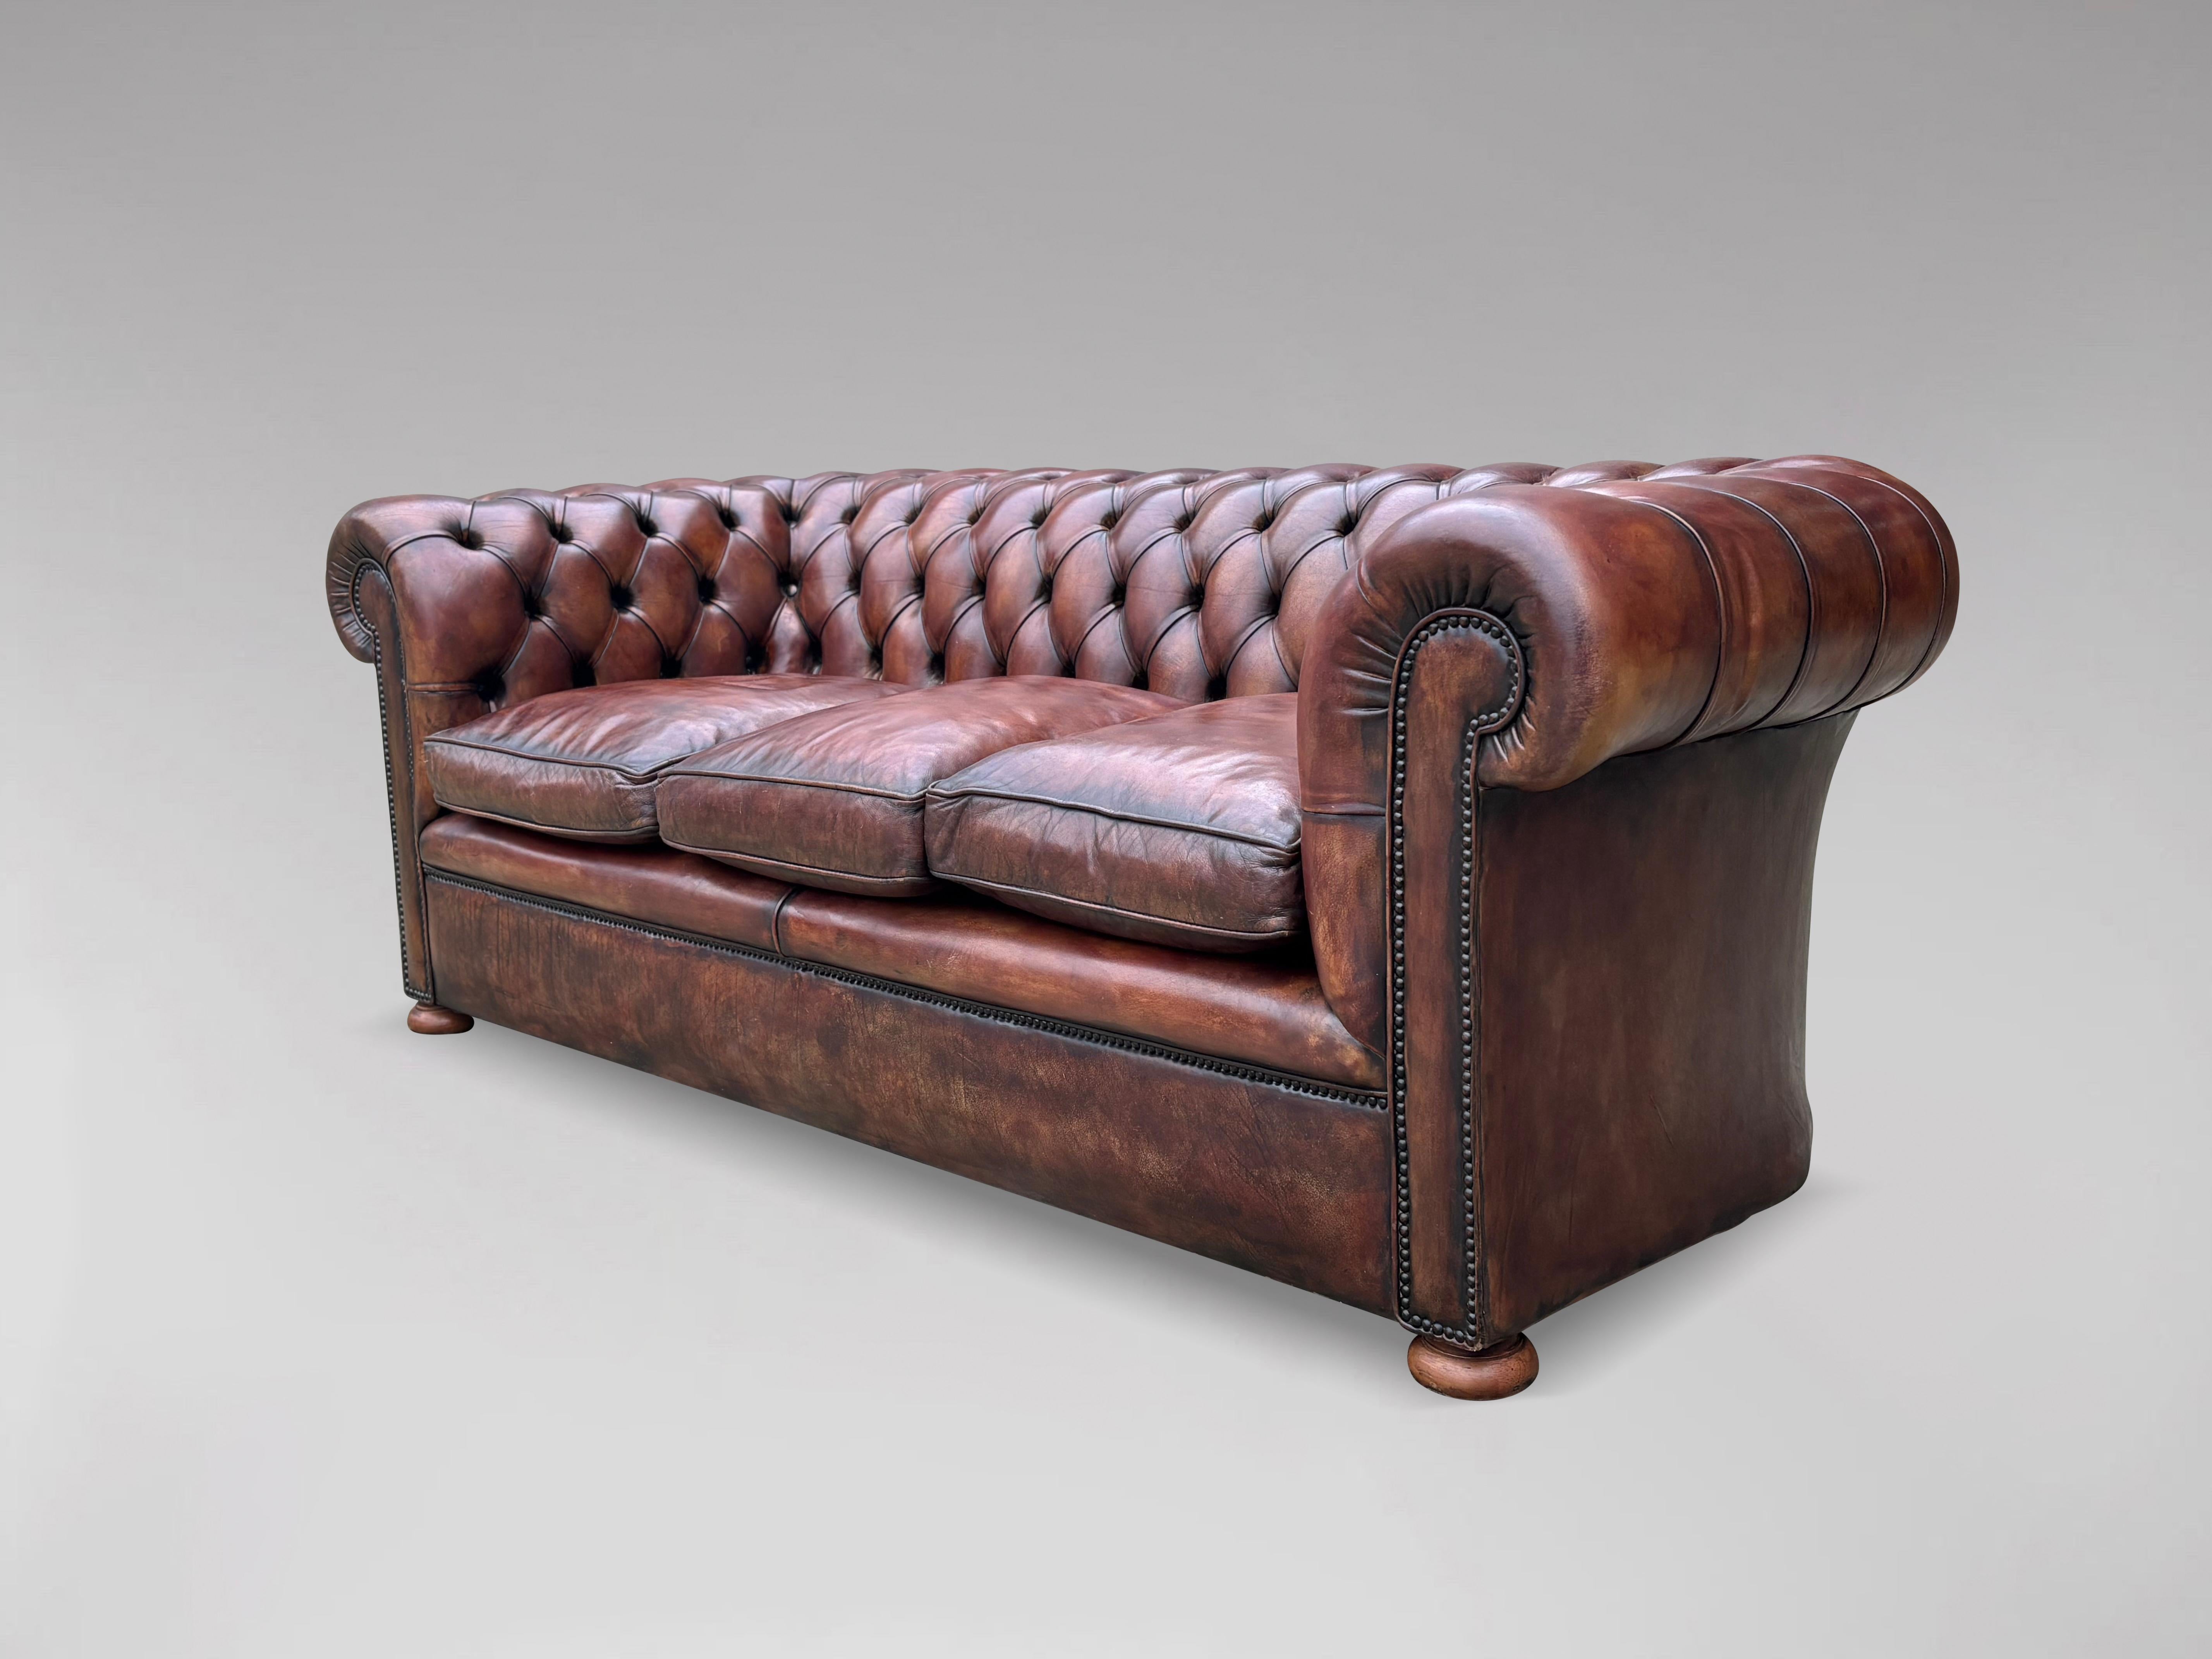 Hand-Crafted Stunning Quality 3 Seater Brown Leather Chesterfield Sofa